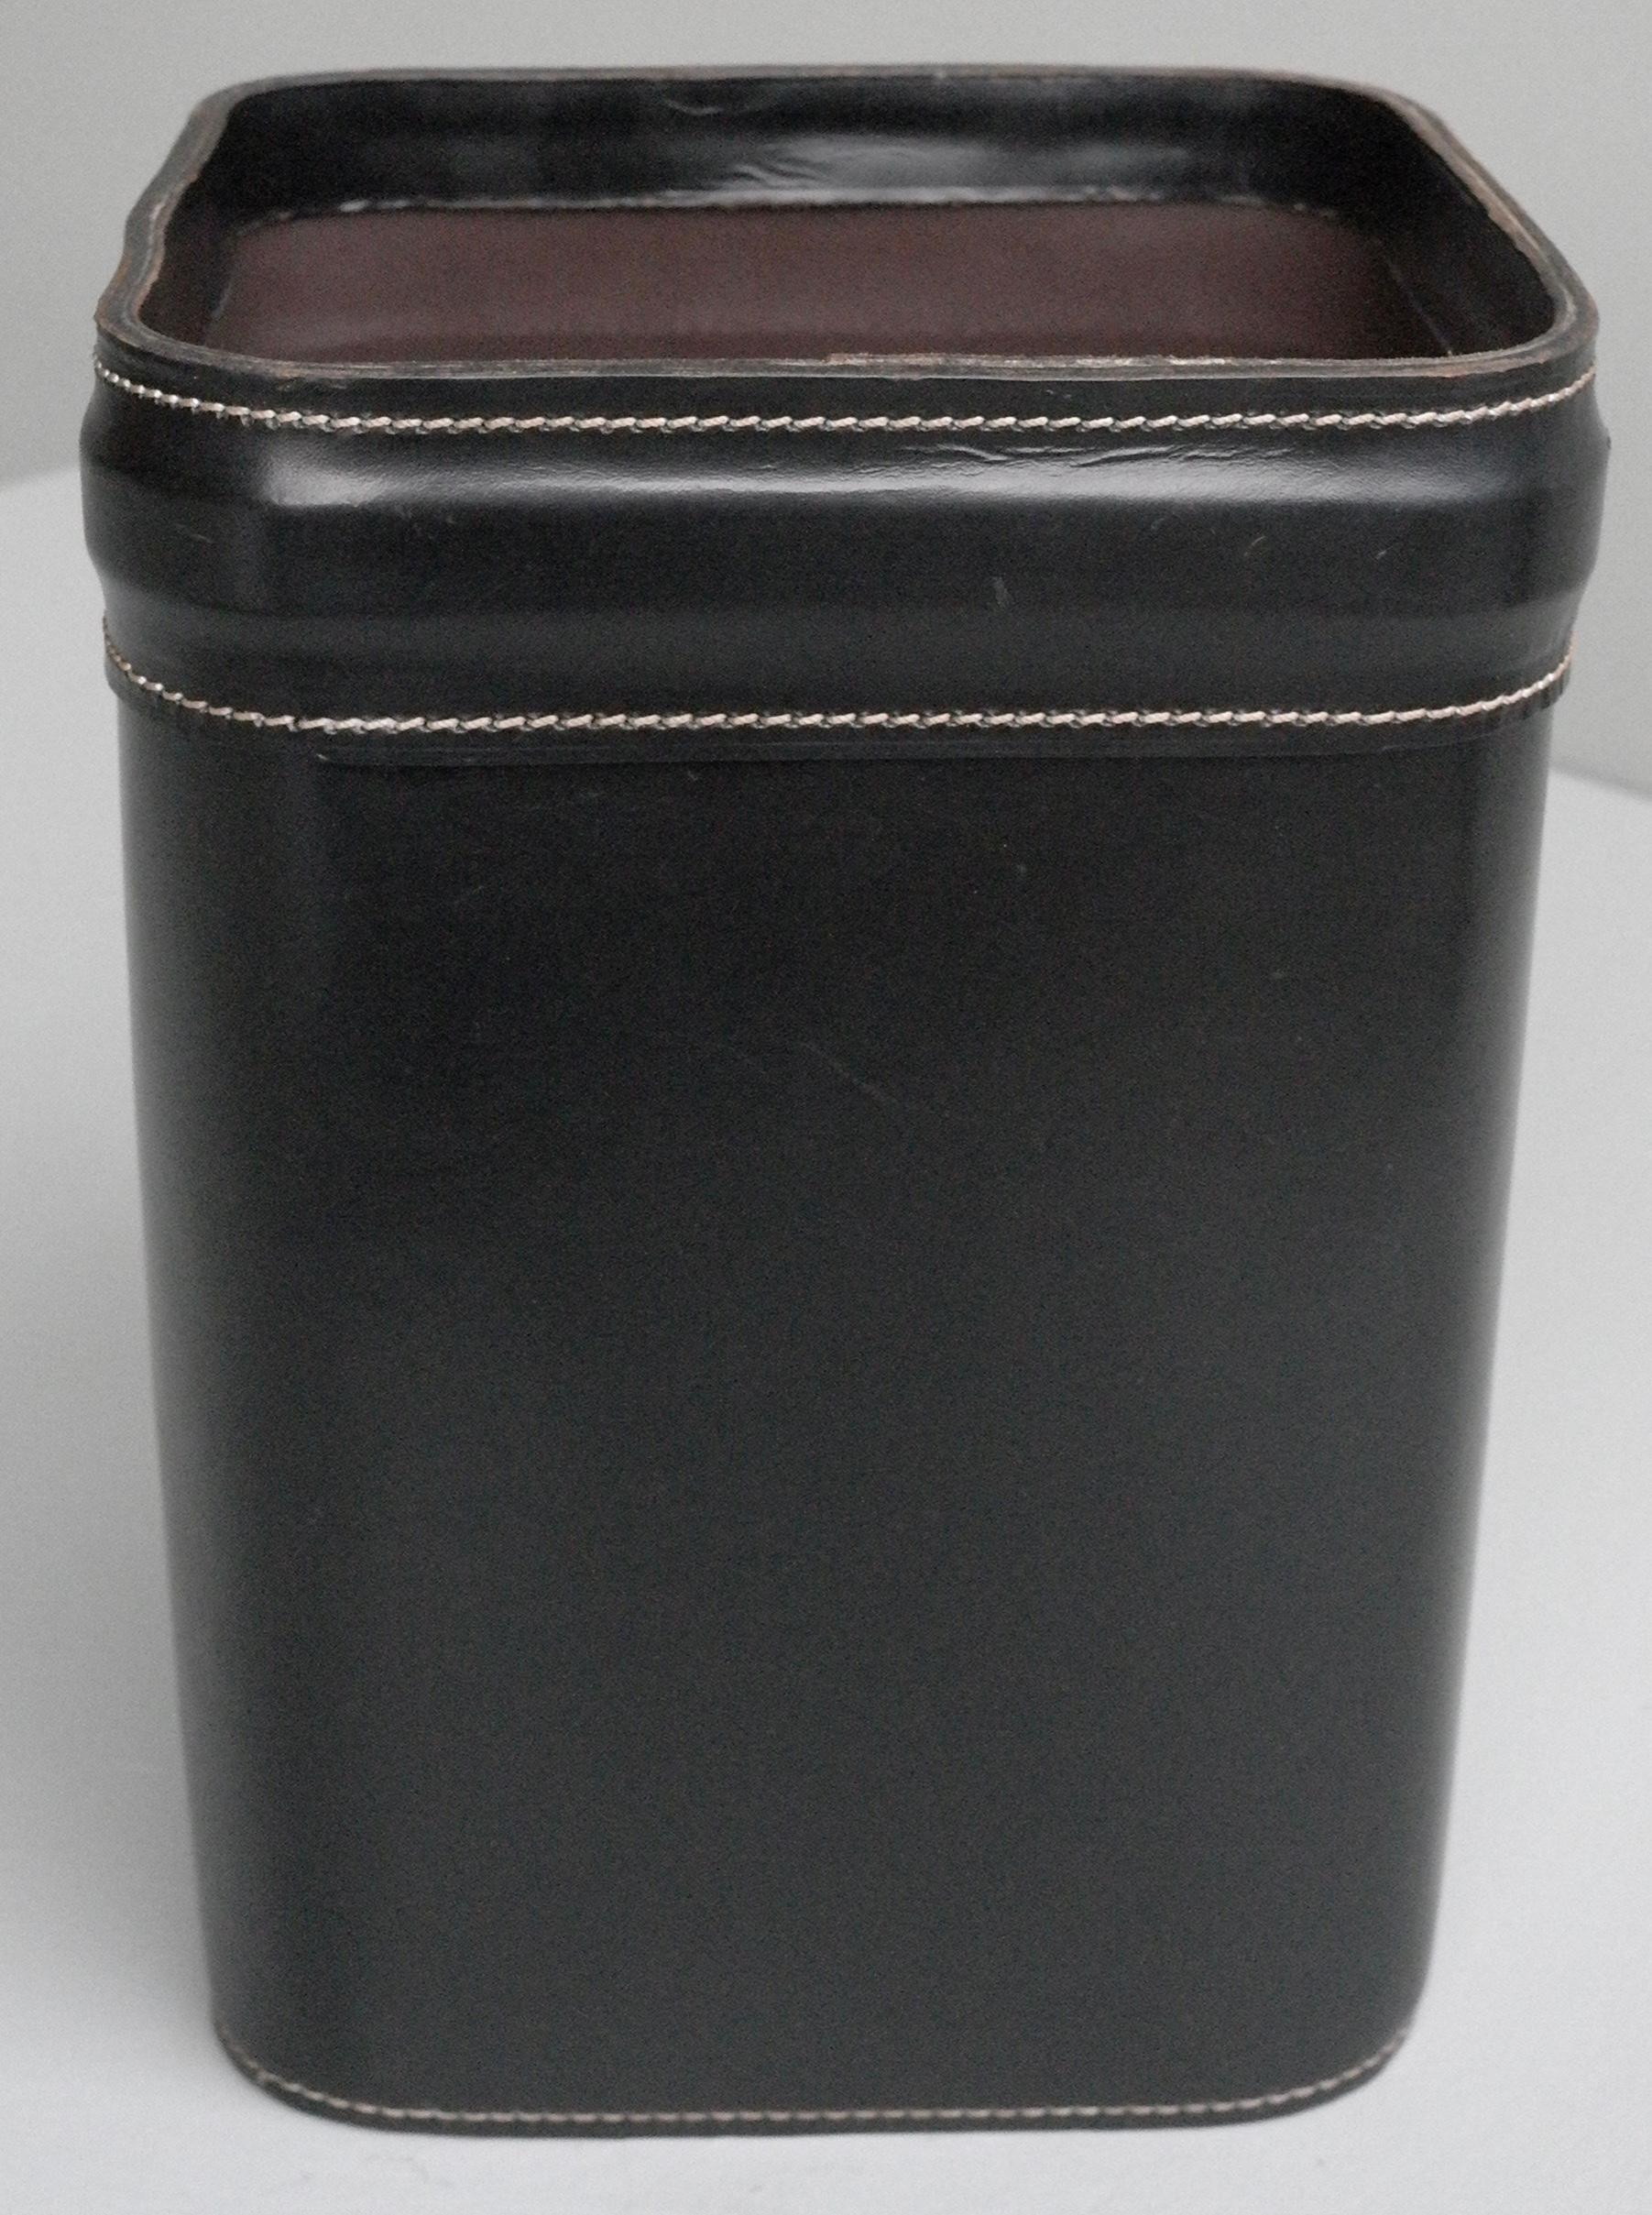 Mid-20th Century French Hand Stitched Black Leather Waste Paper Basket